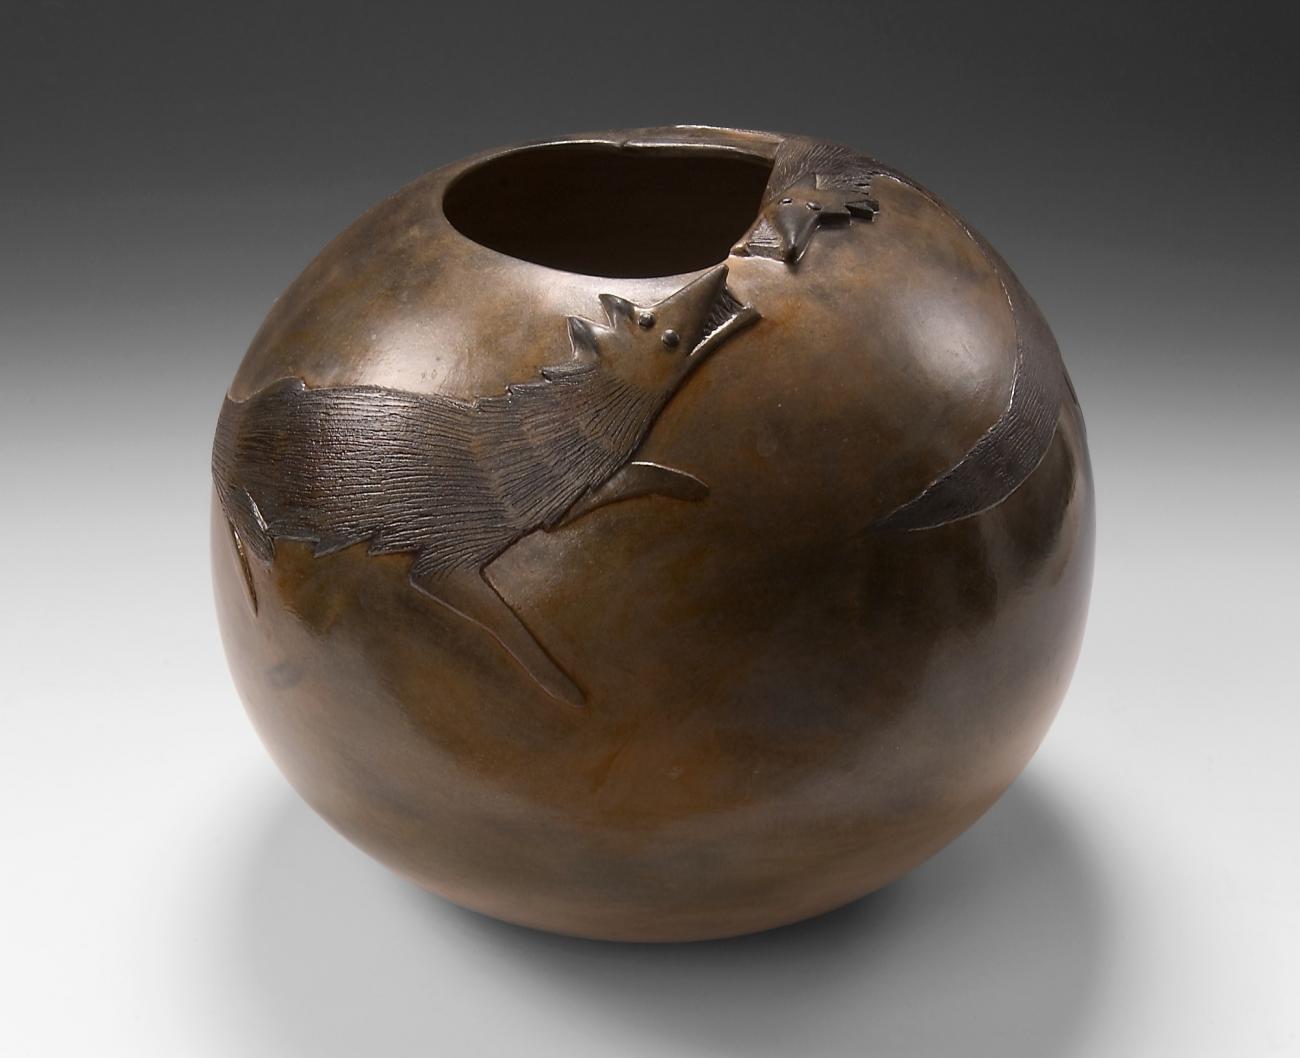 Pot with wolves engaging with each other